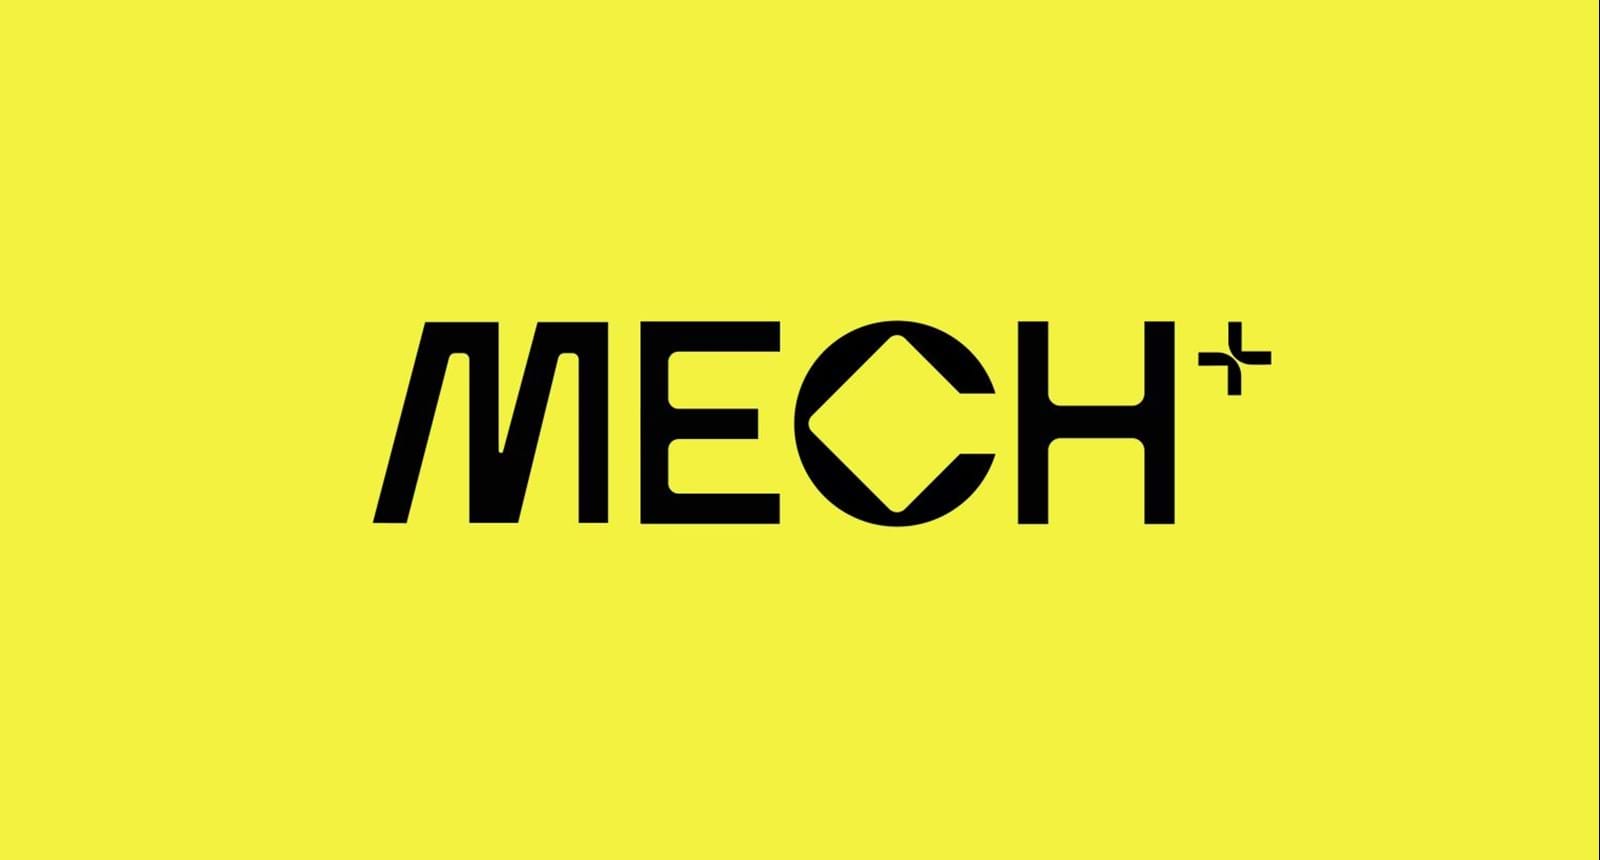 Mech TV  launches fast channel on Samsung TV Plus bringing the iconic Robot Wars and Techno Games back to audiences